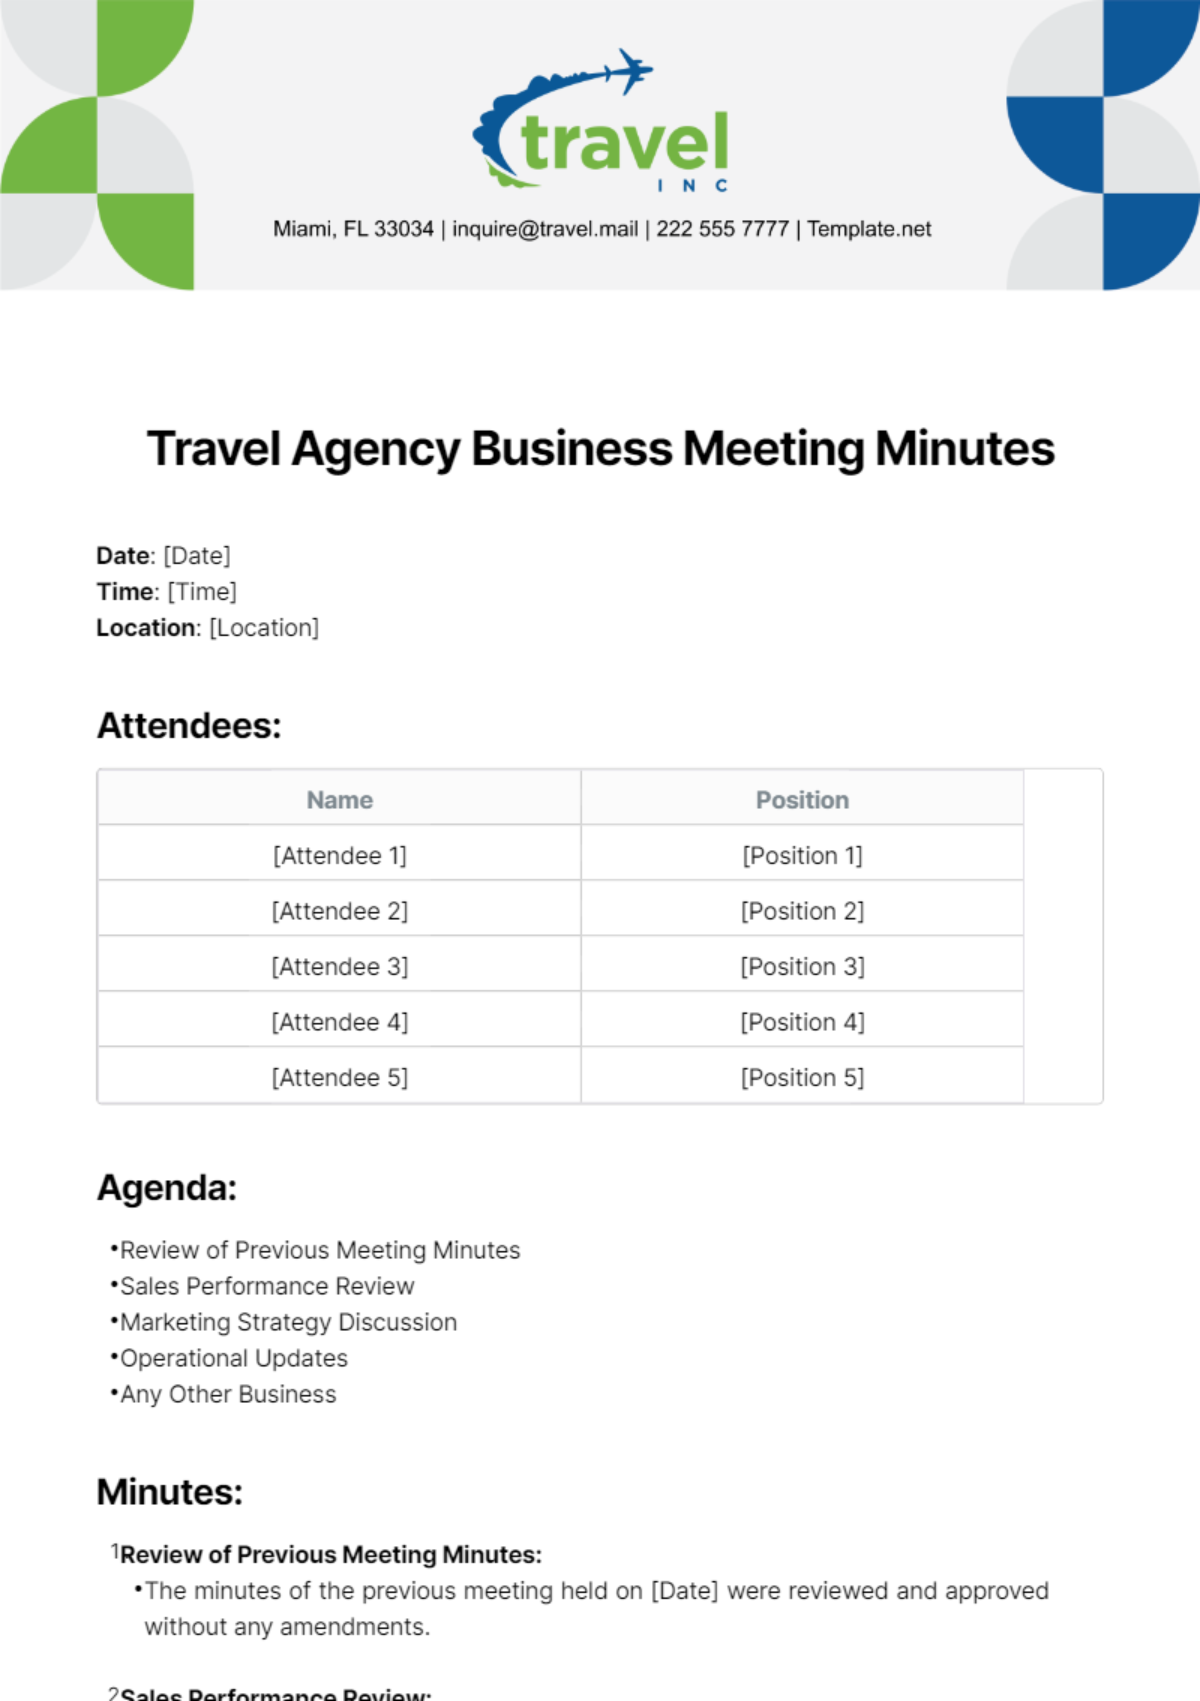 Travel Agency Business Meeting Minutes Template